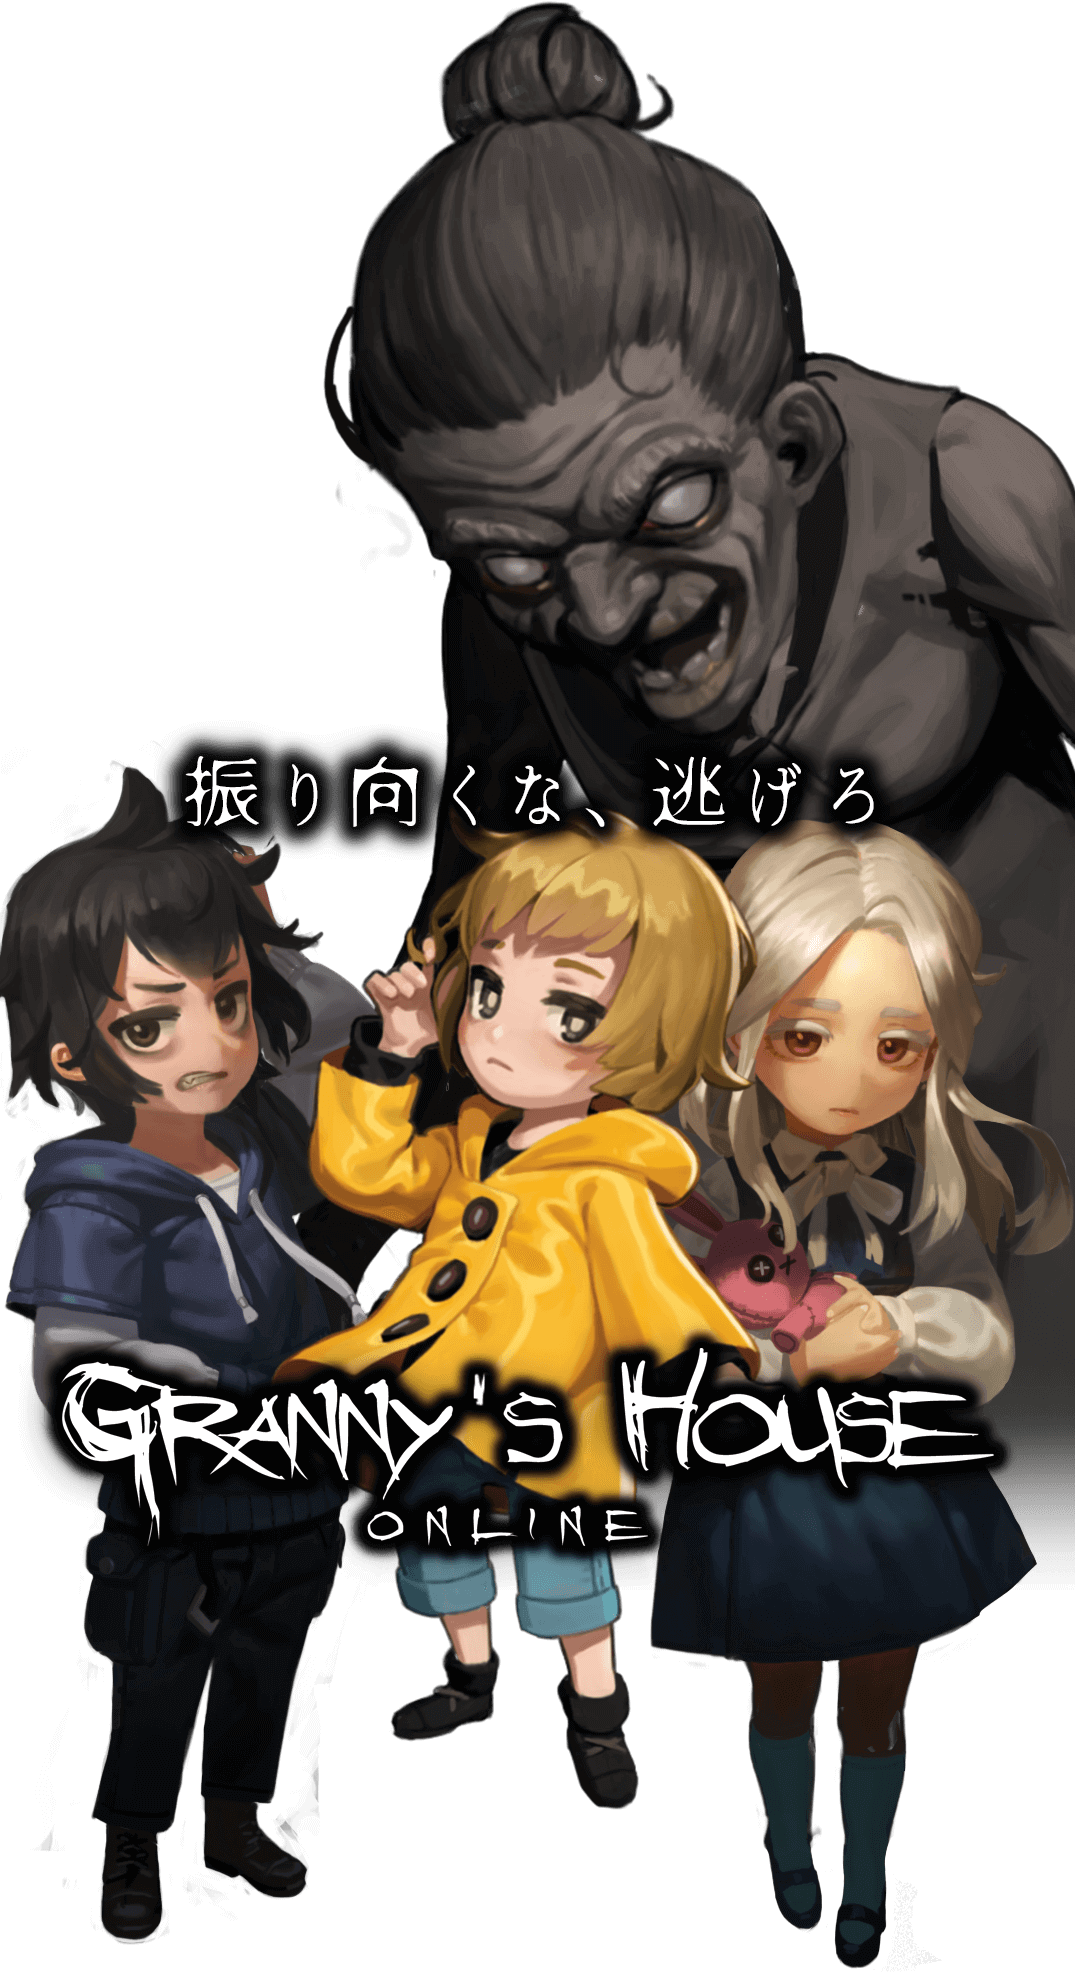 Granny's House by SUPERCAT Inc.